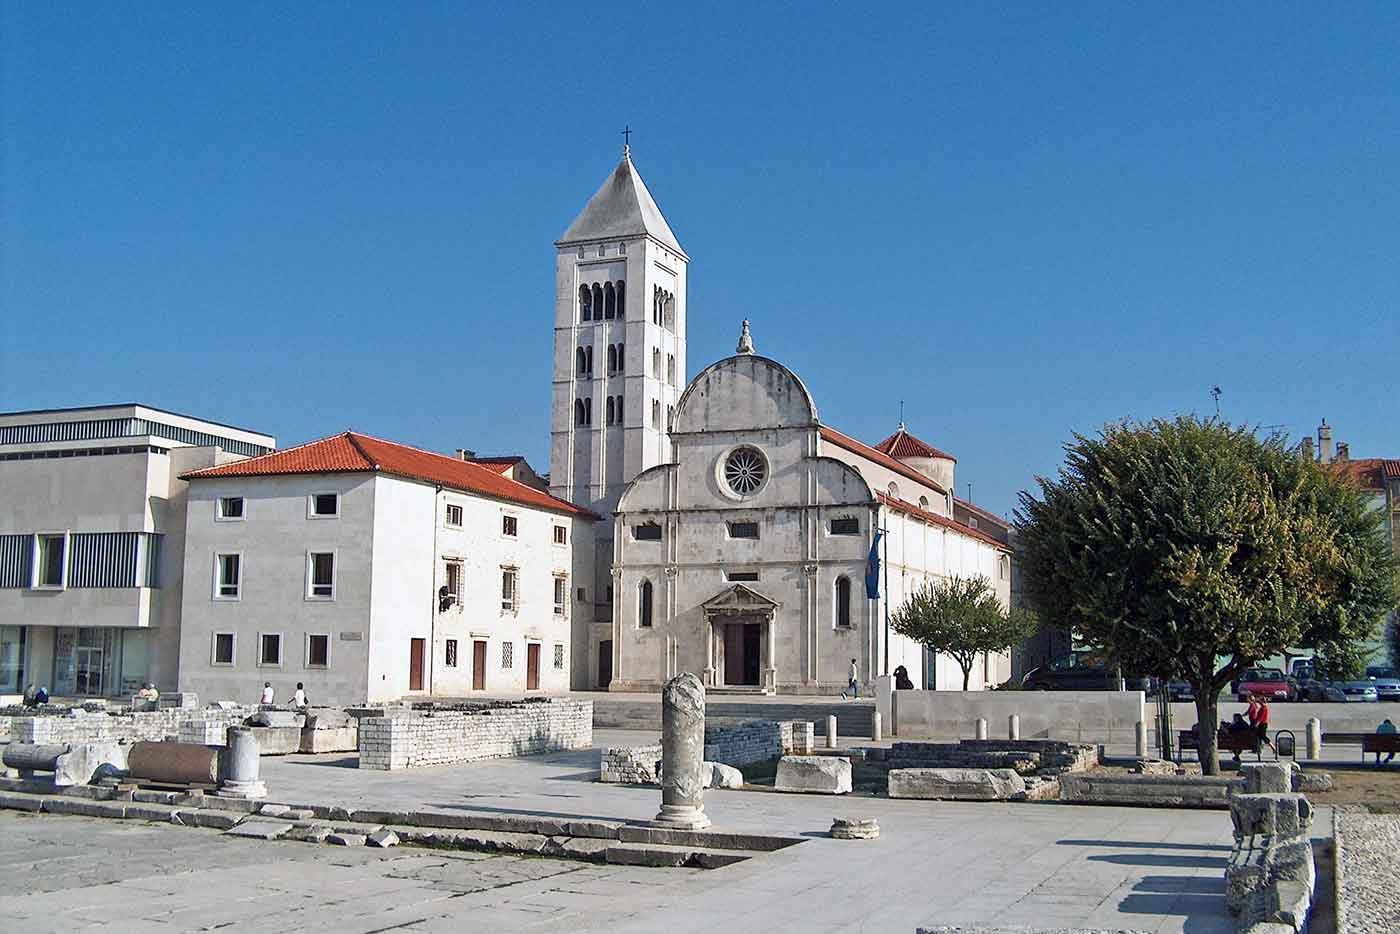 22 Unforgettable Tourist Places, Beaches to Visit and Things to Do in Zadar